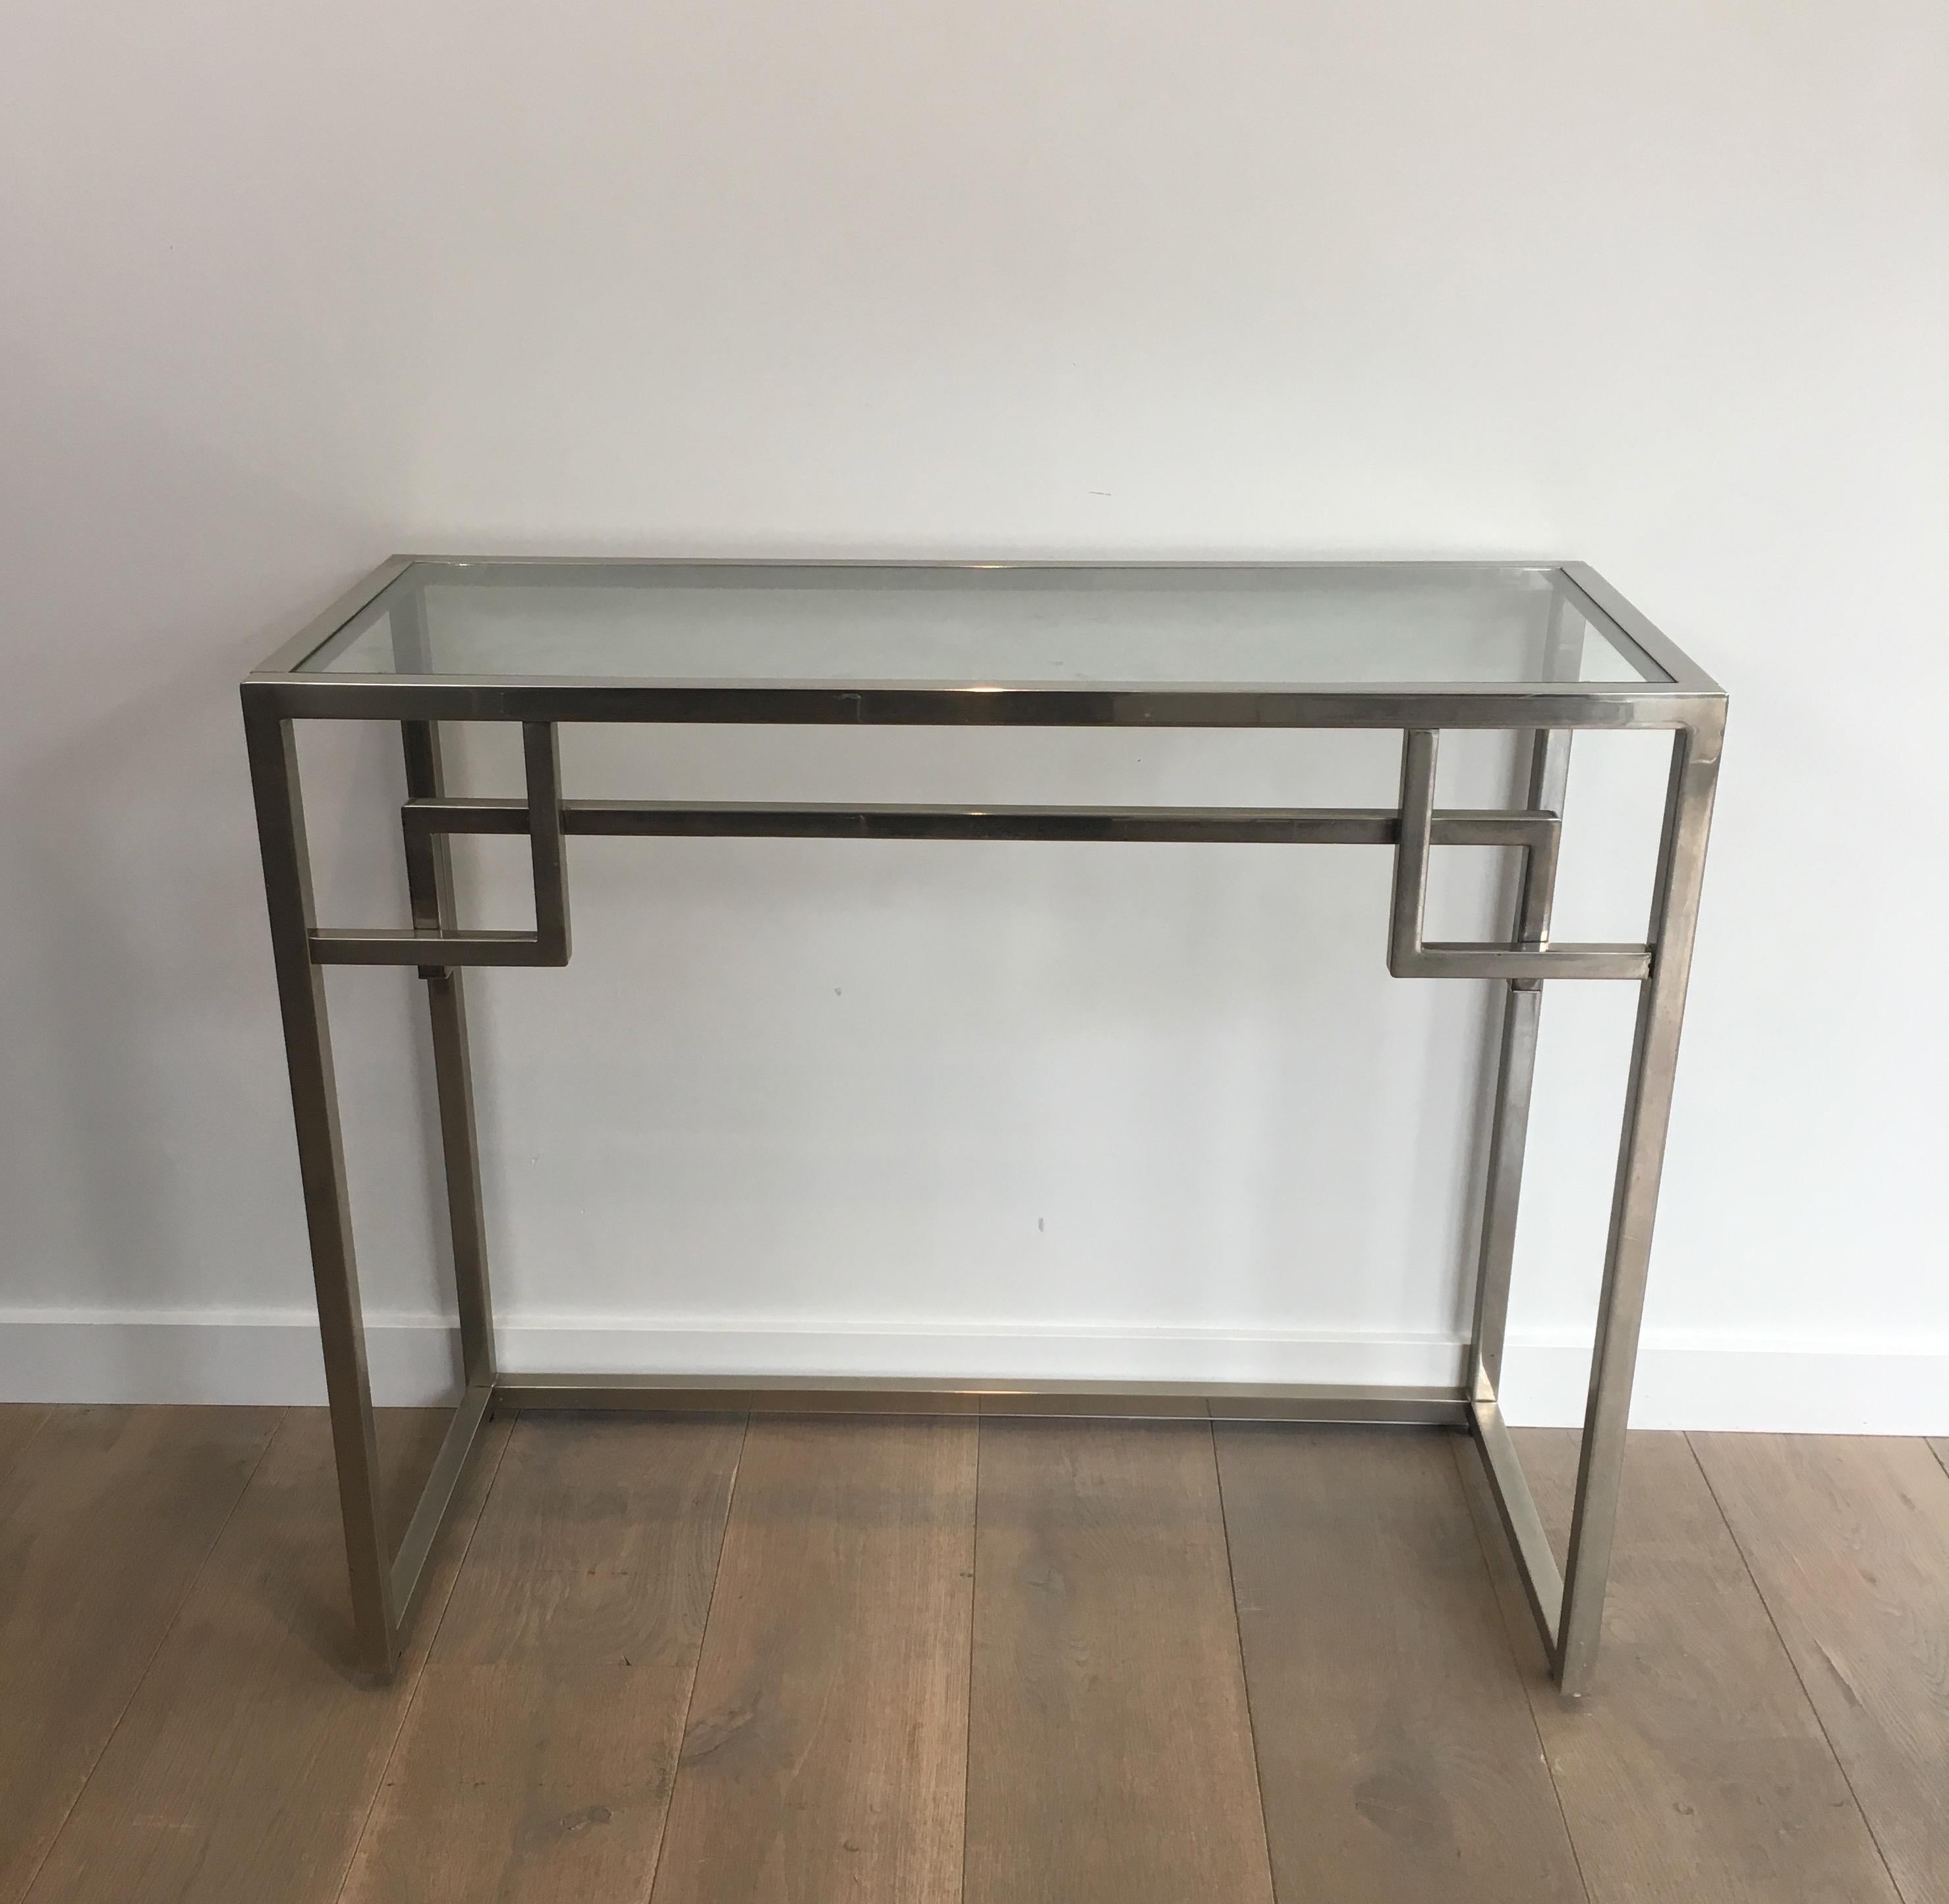 This console table is made of chrome with a clear glass shelf. This is a nice design, very simple and pure. This is a French work, circa 1970.